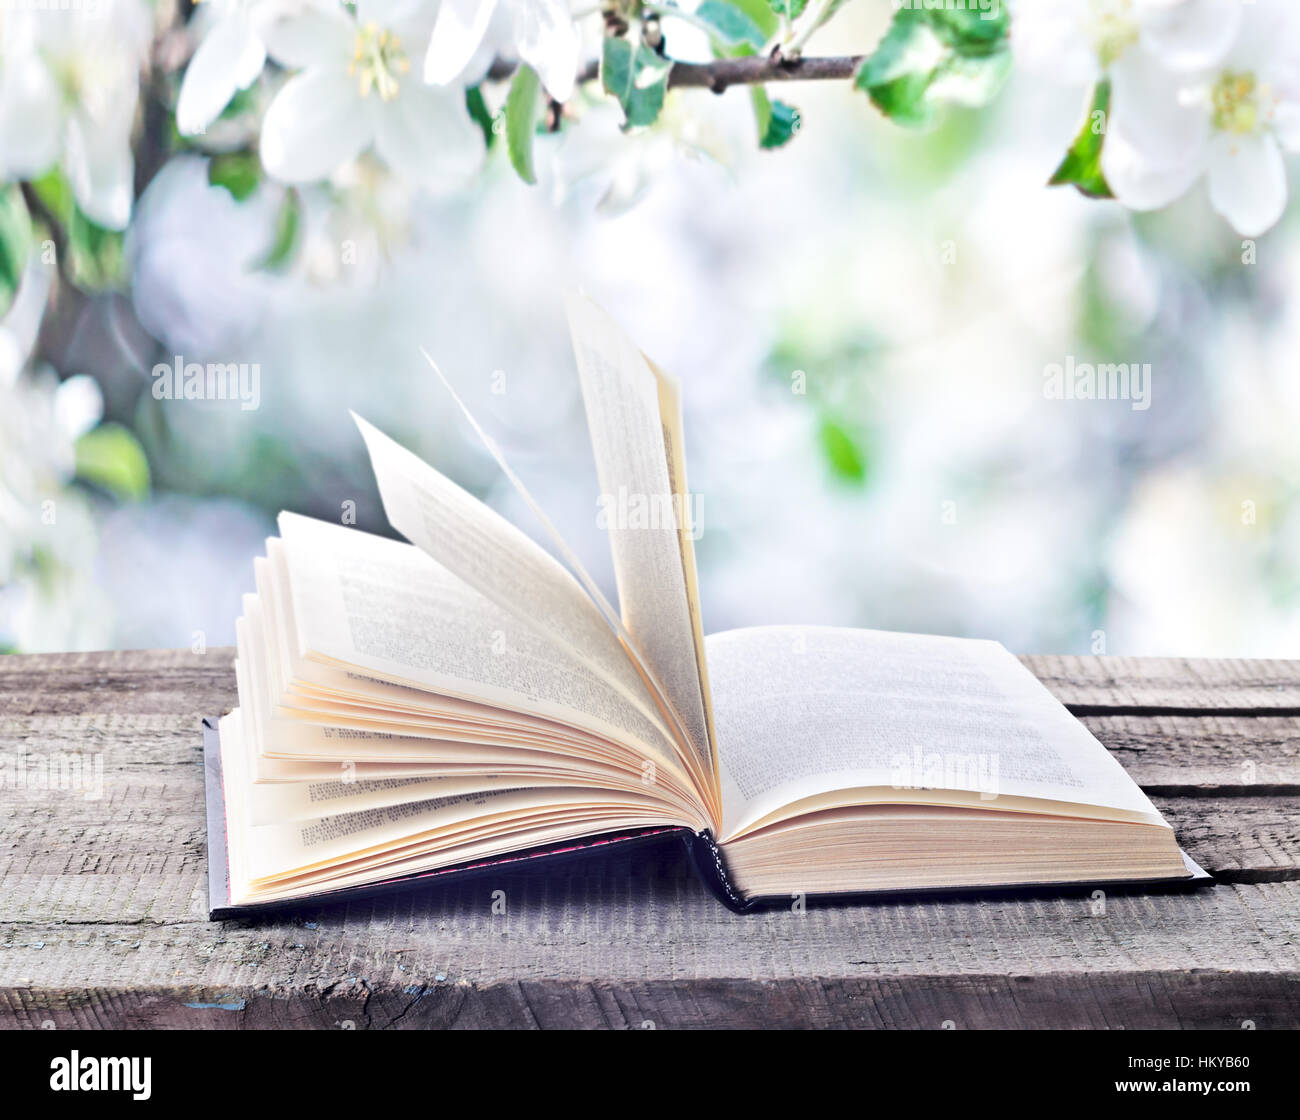 Open book on wooden table outdoors on natural spring or summertime background. Return to spring or summer time. Invitation to study literatures Stock Photo